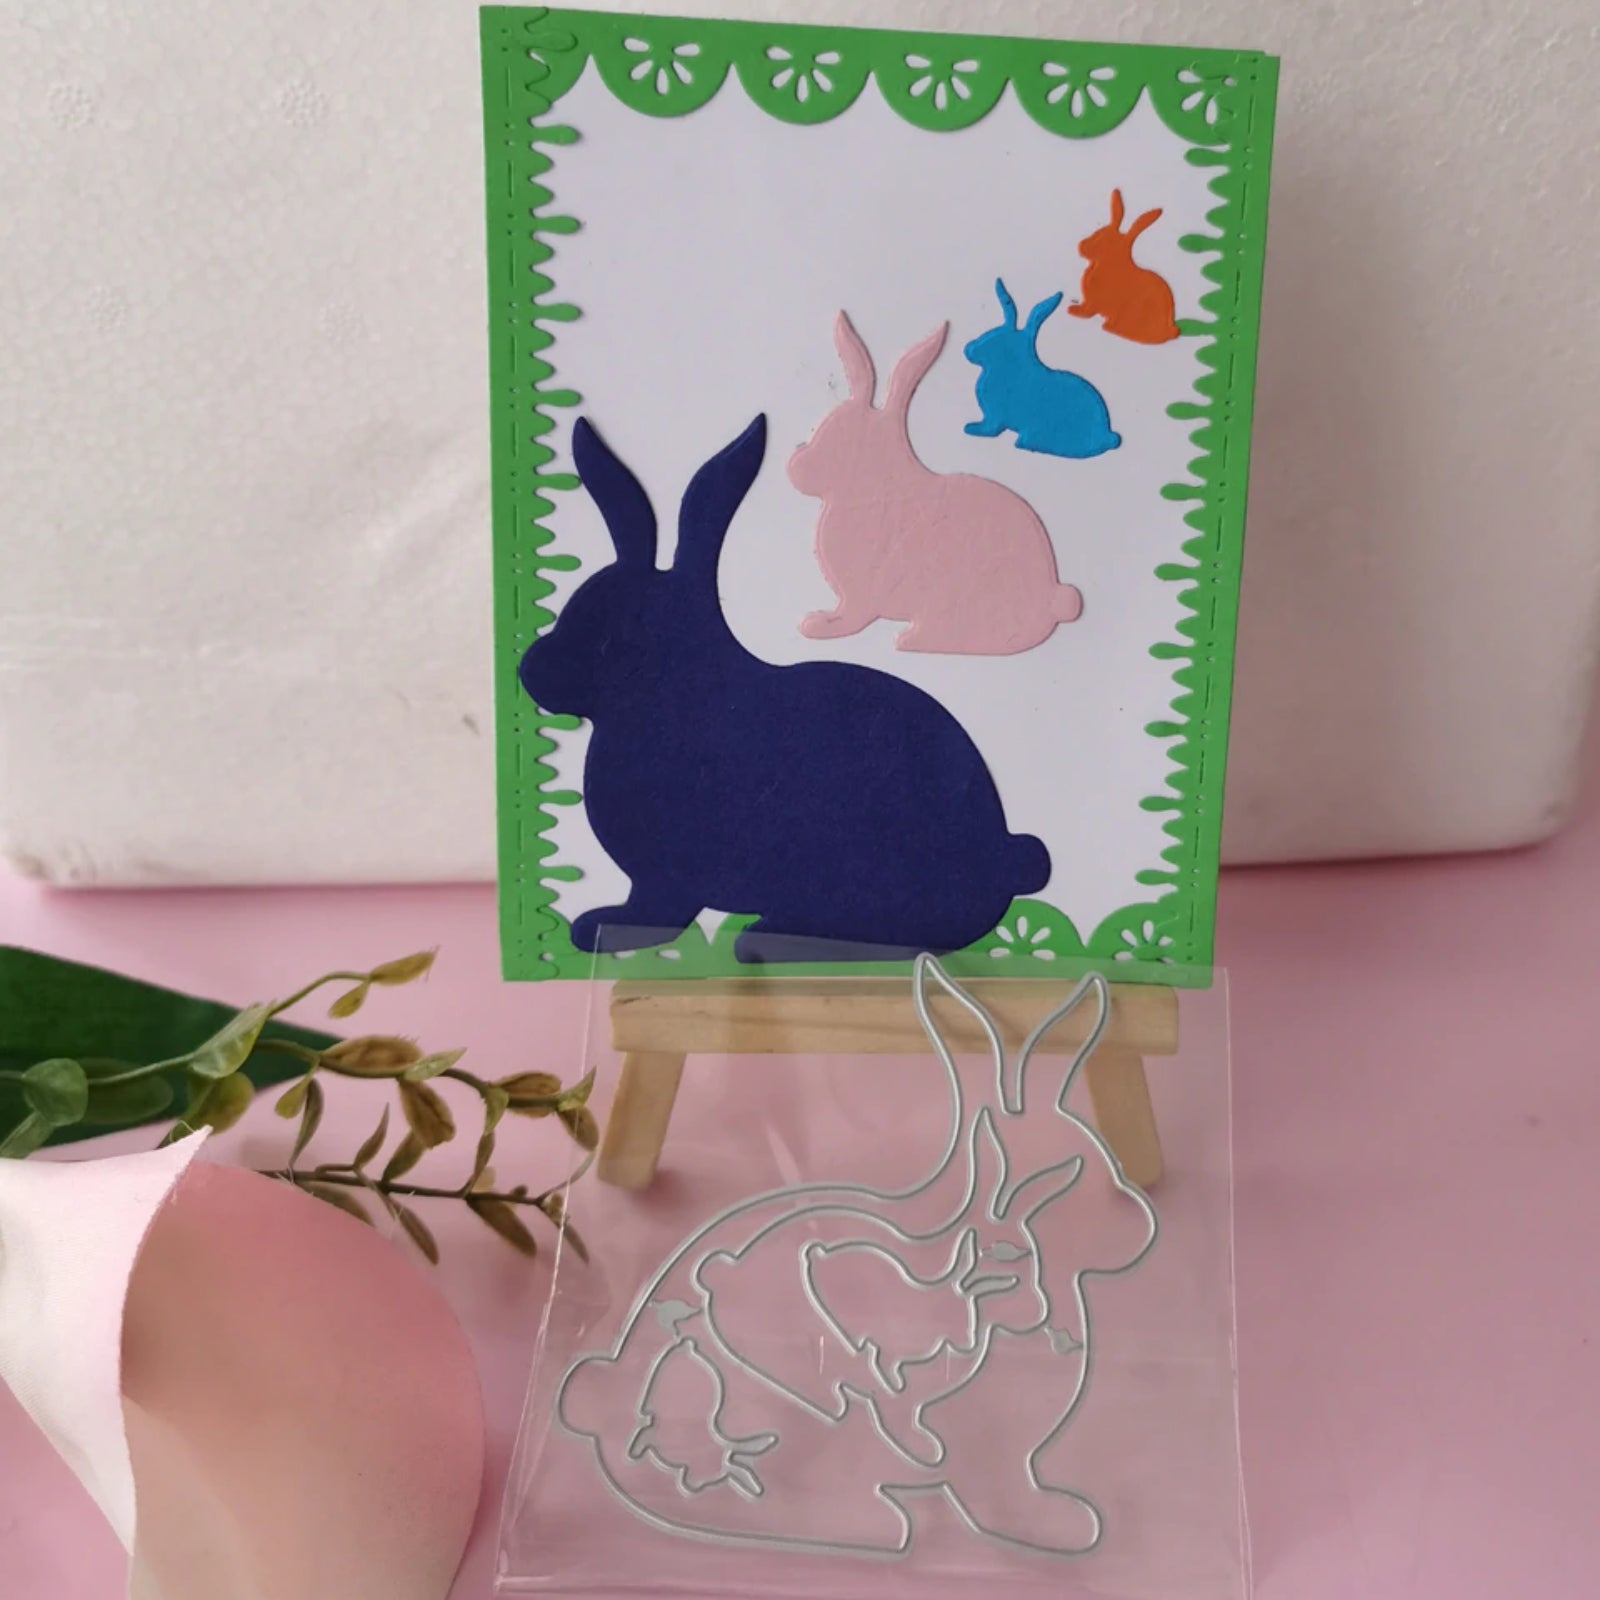 Easter Bunnies Silhouettes 4 Sizes Cutting Dies